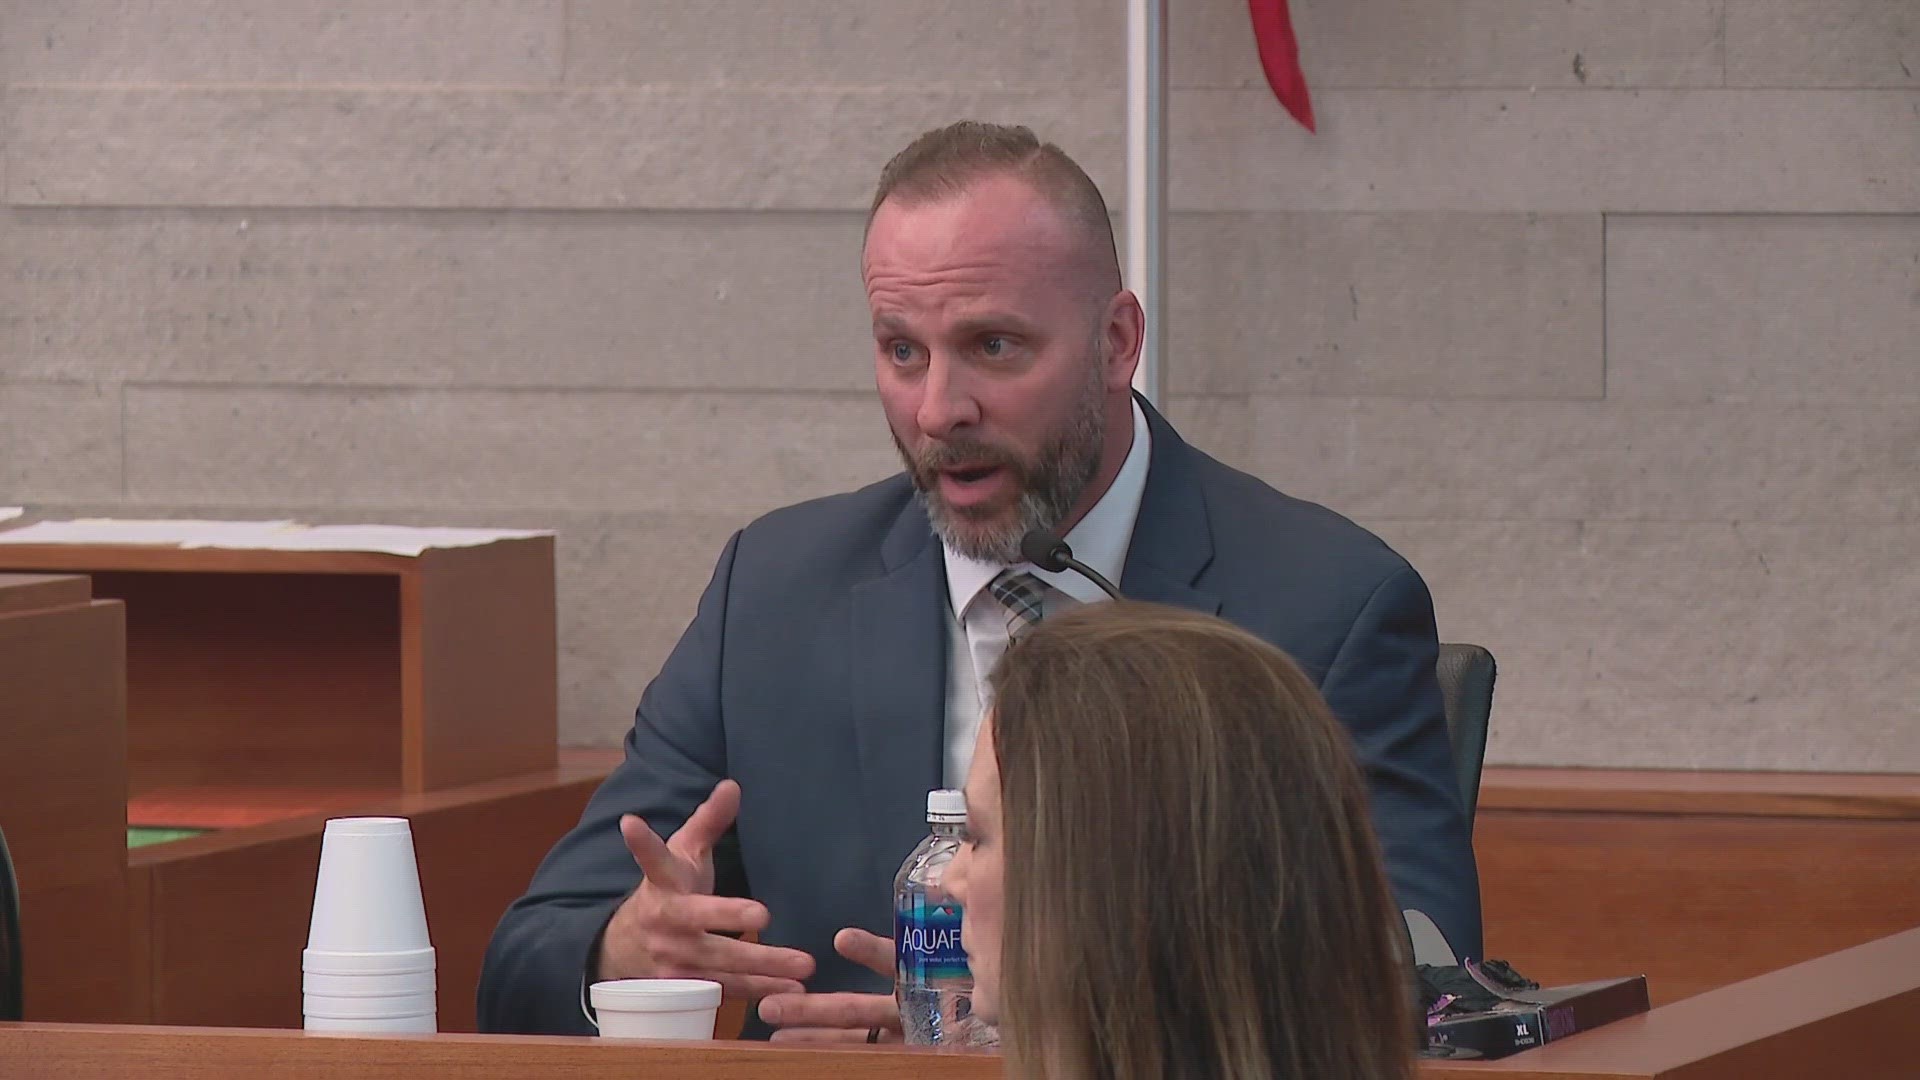 When former deputy Jason Meade took the stand Tuesday, he was asked questions about Dec. 4, 2020, the day Casey Goodson Jr. was fatally shot.